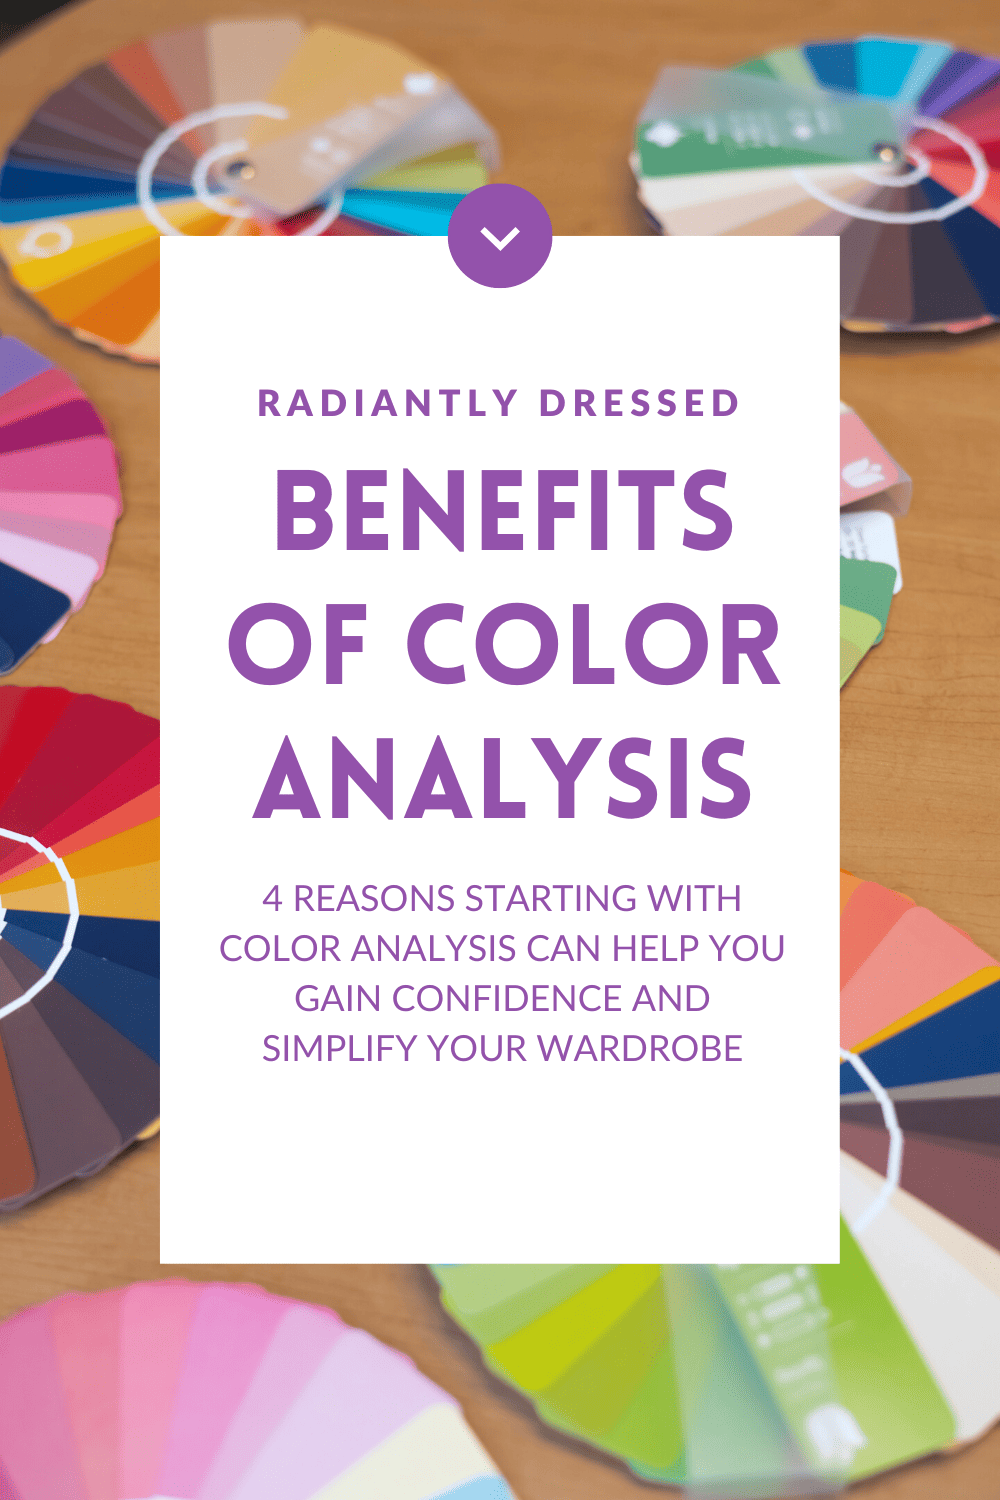 4 Benefits of color analysis